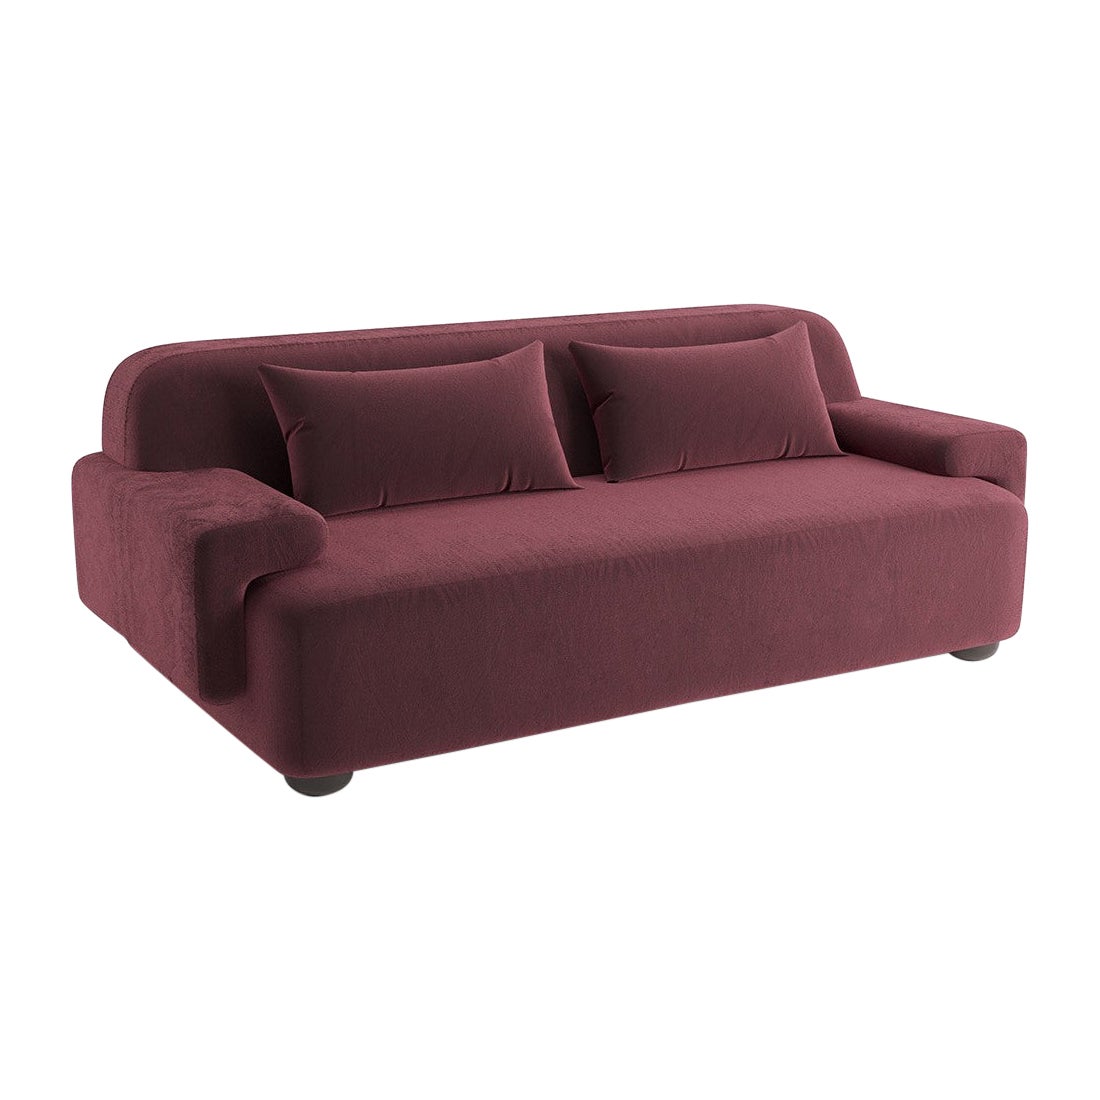 Popus Editions Lena 3-Seater Sofa in Red Como Velvet Upholstery